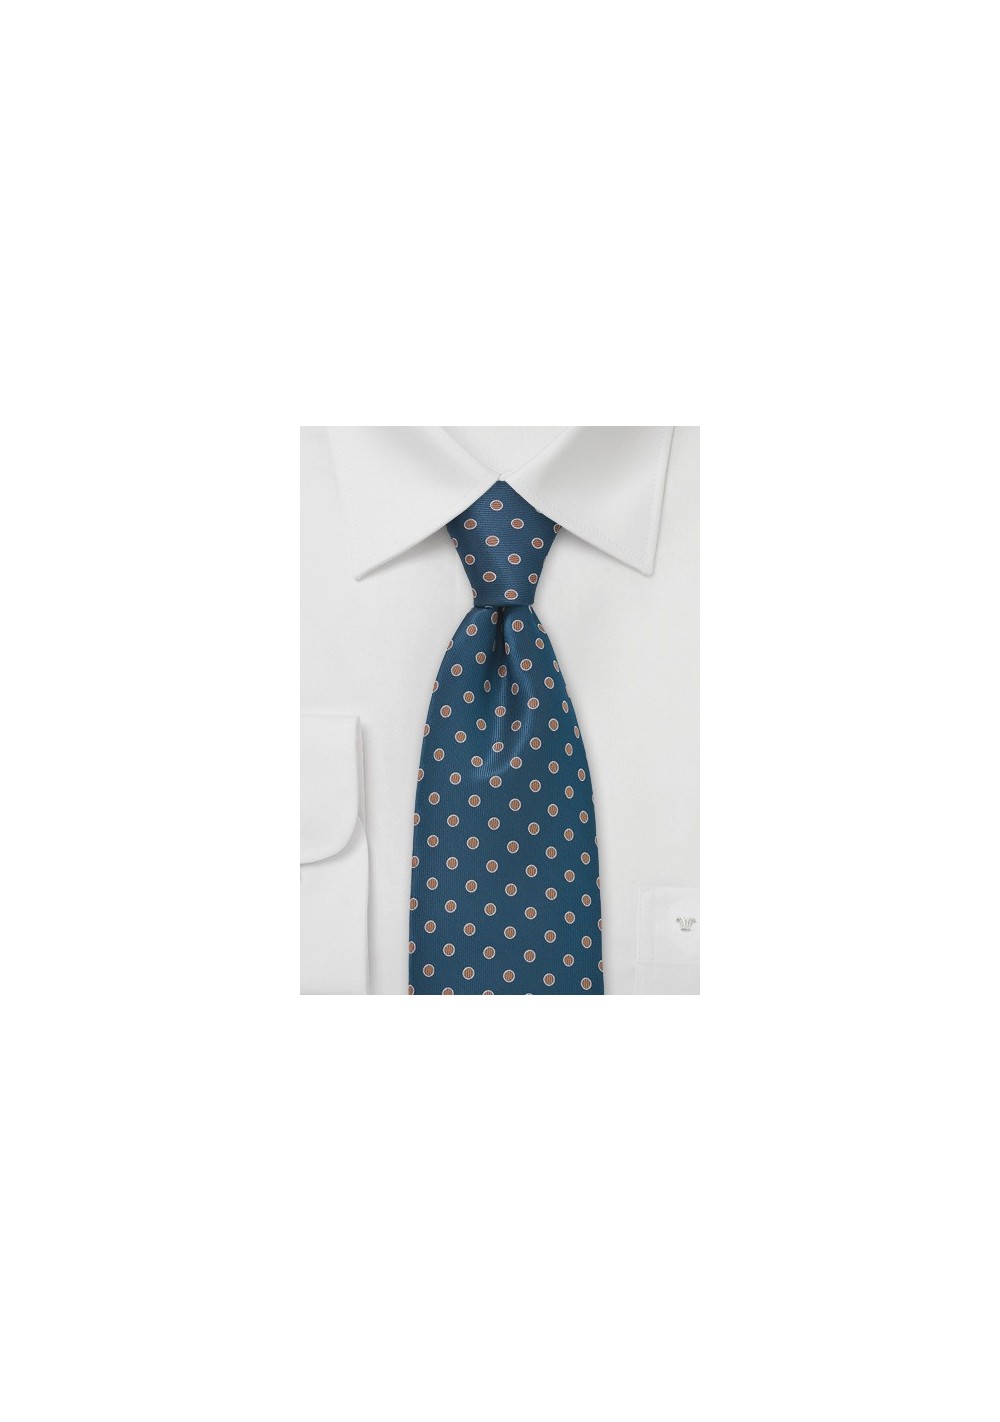 Teal Blue and Copper Dotted Tie